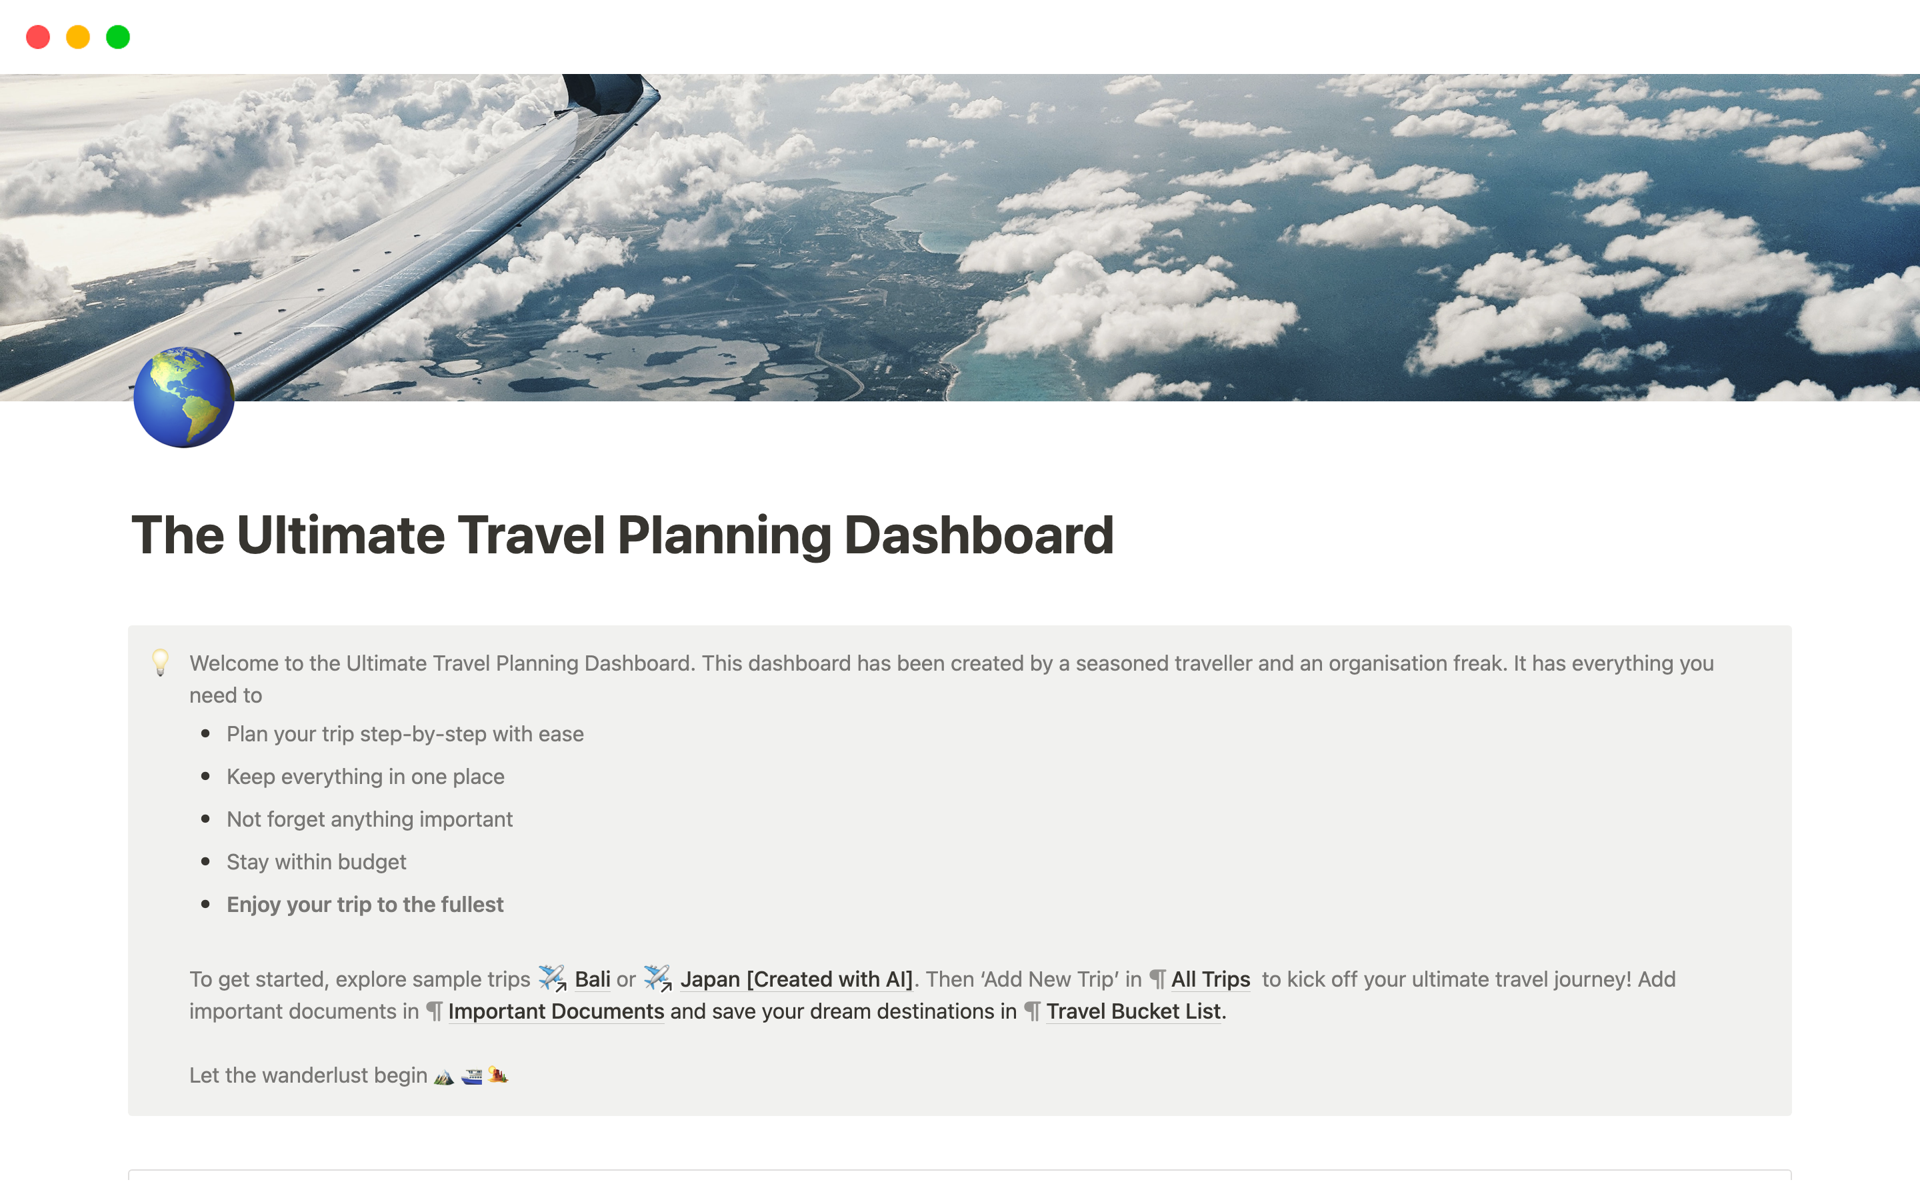 AI-Powered Travel Planner with everything to plan your trips with ease and care